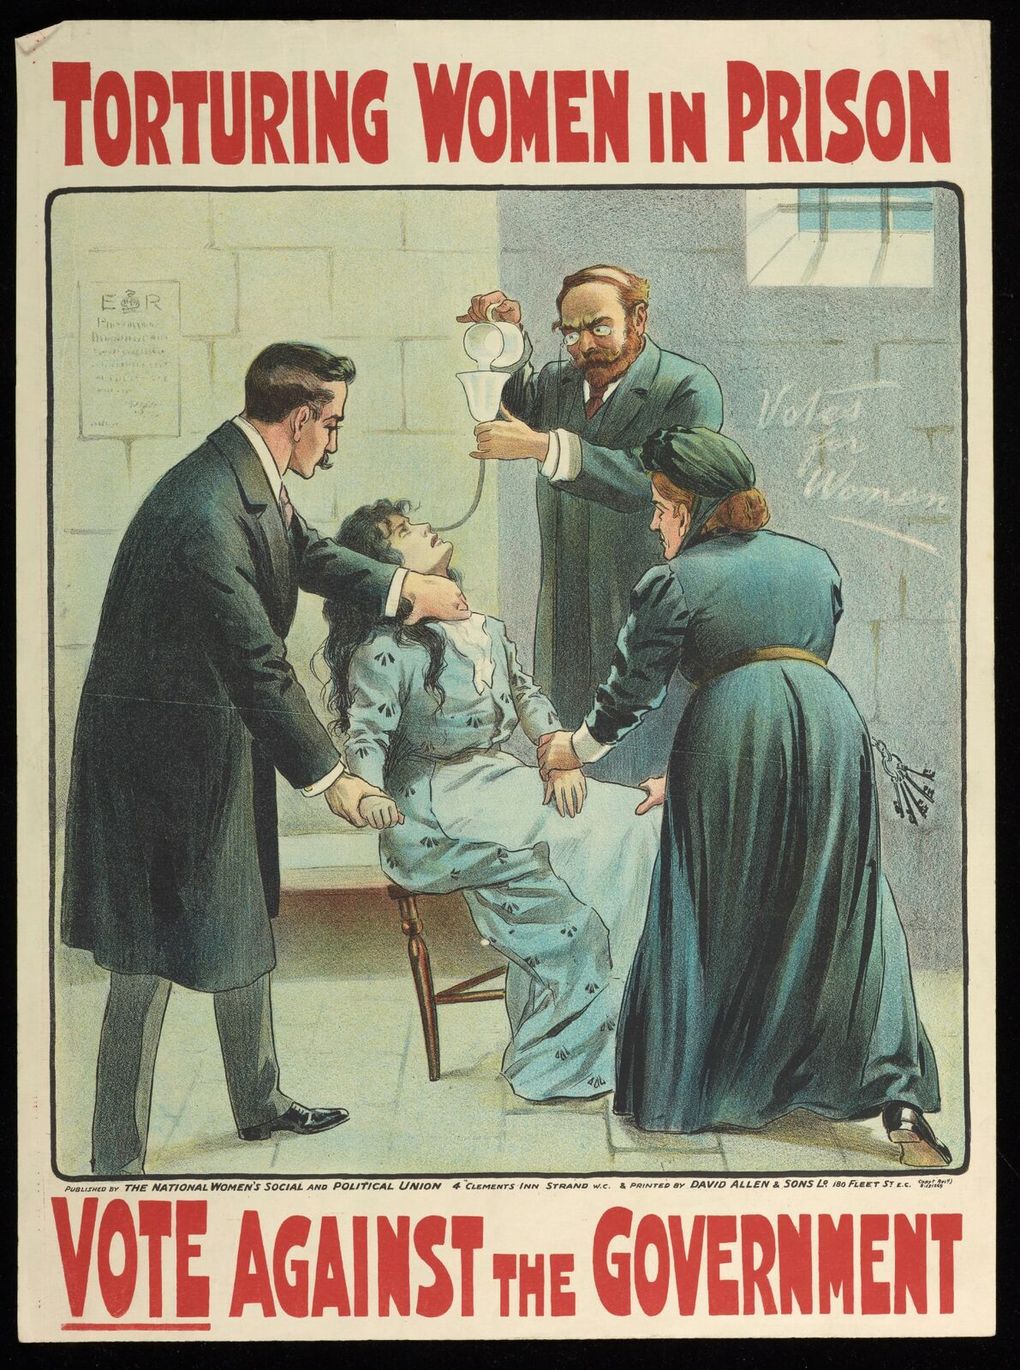 suffragettes posters